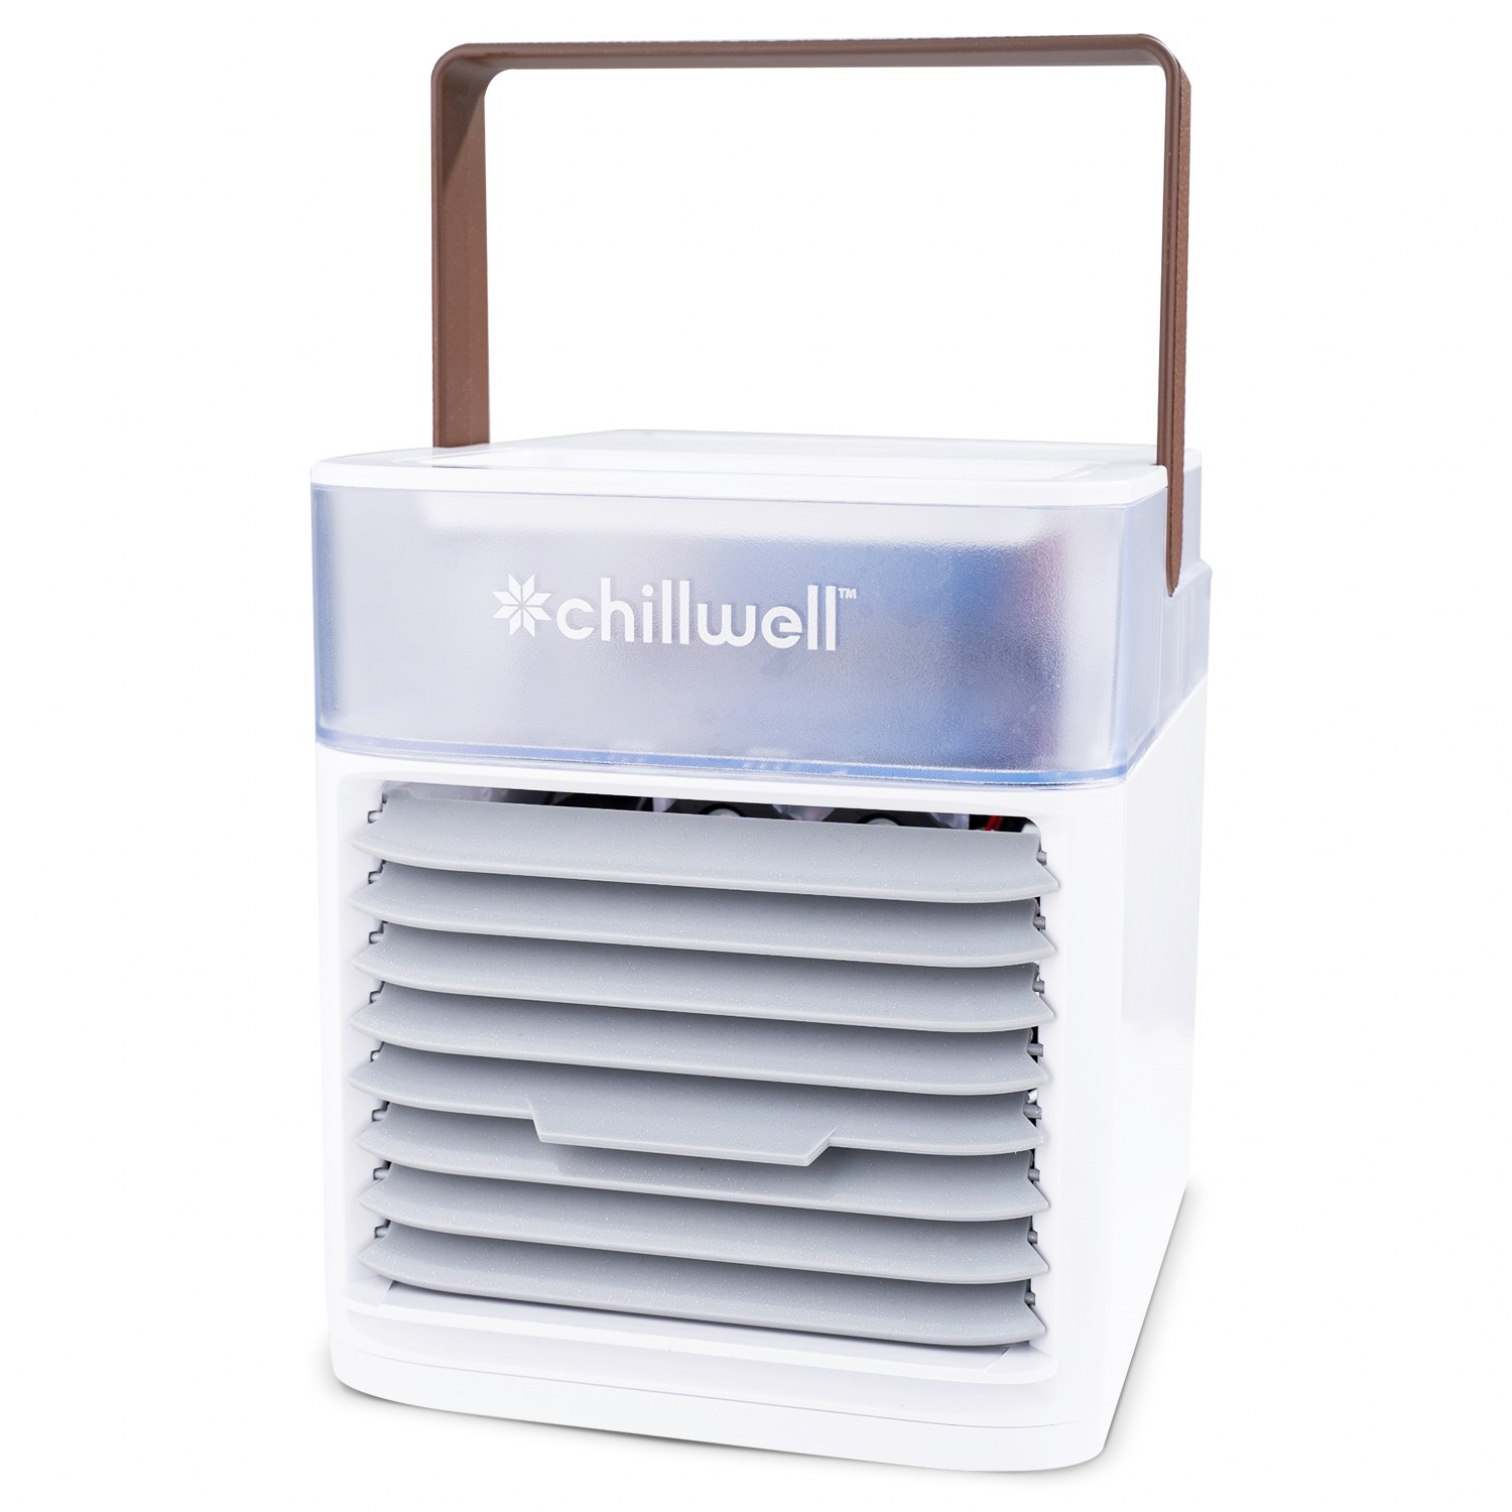 Chillwell AC Evaporative Air Cooler Tower Reviews